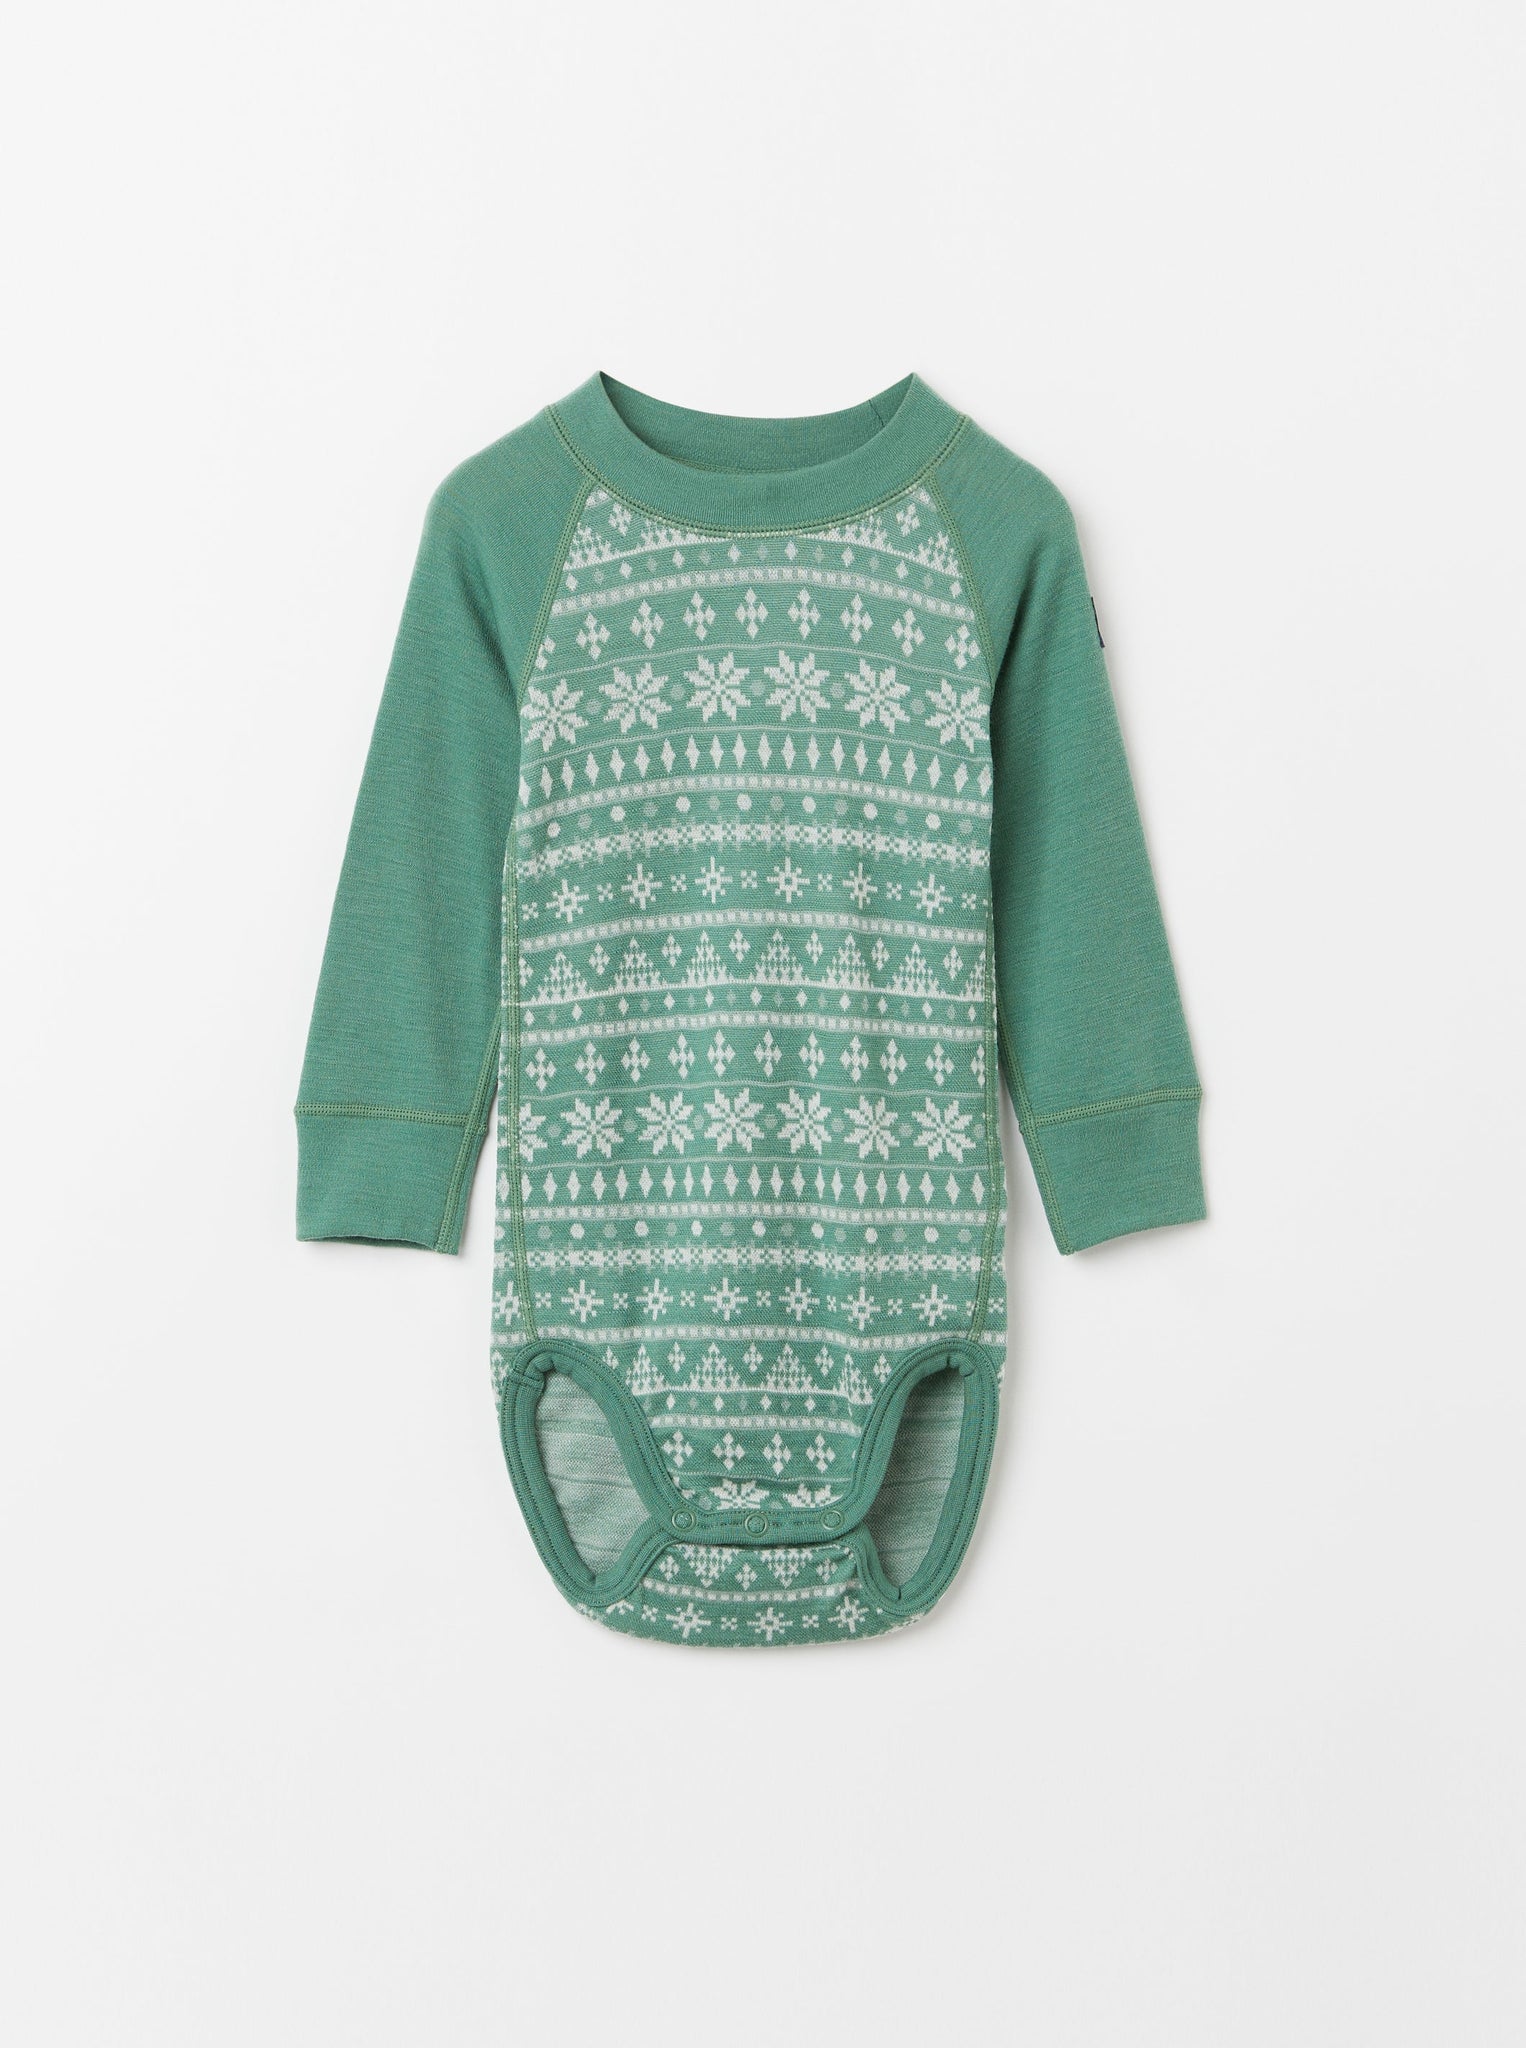 Green Thermal Merino Babygrow from the Polarn O. Pyret kidswear collection. Made using ethically sourced materials.